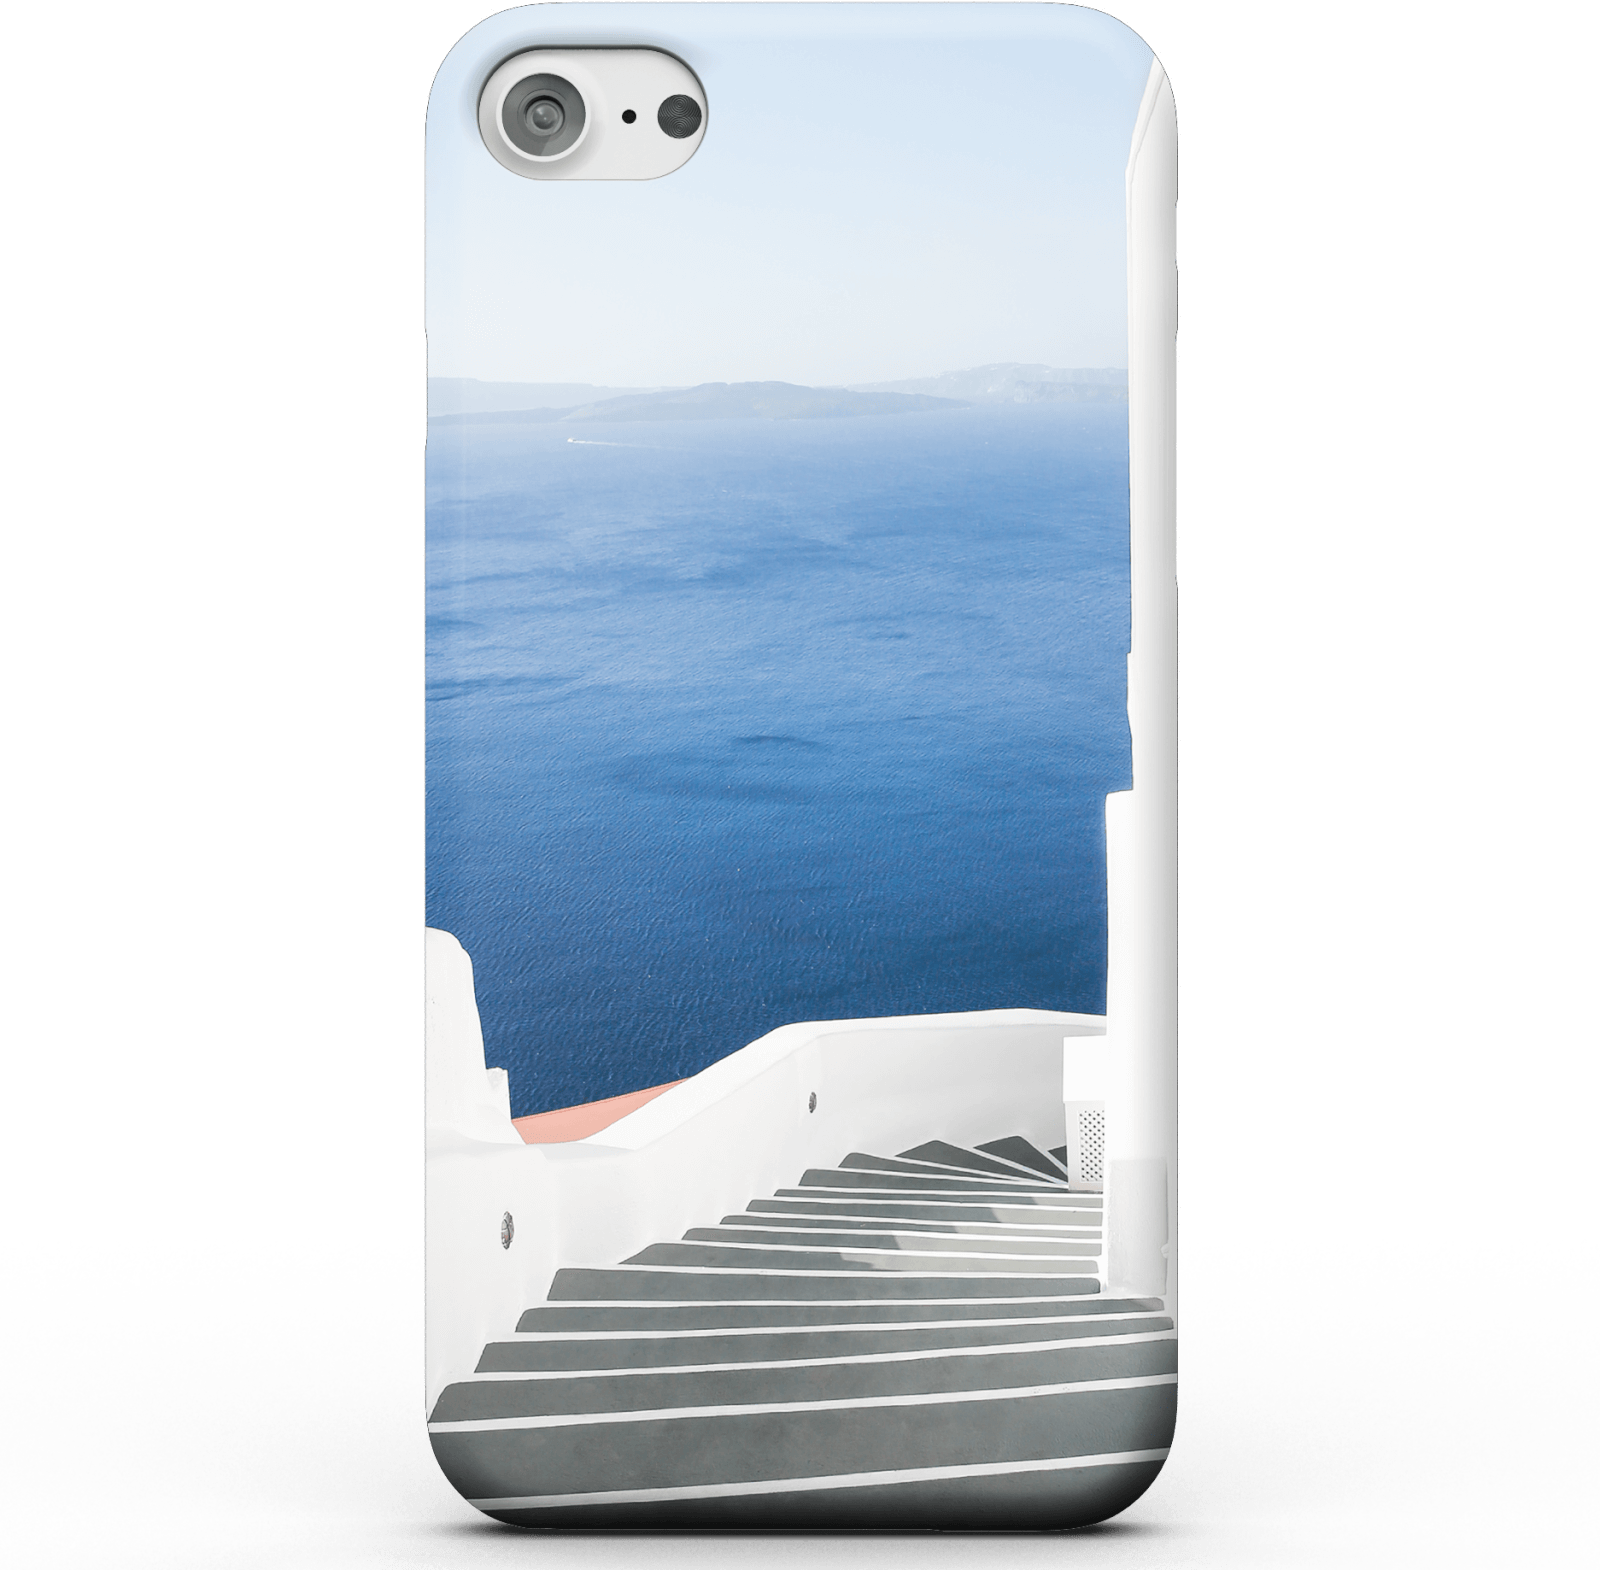 Santorini Steps Phone Case for iPhone and Android - iPhone 5/5s - Snap Case - Matte